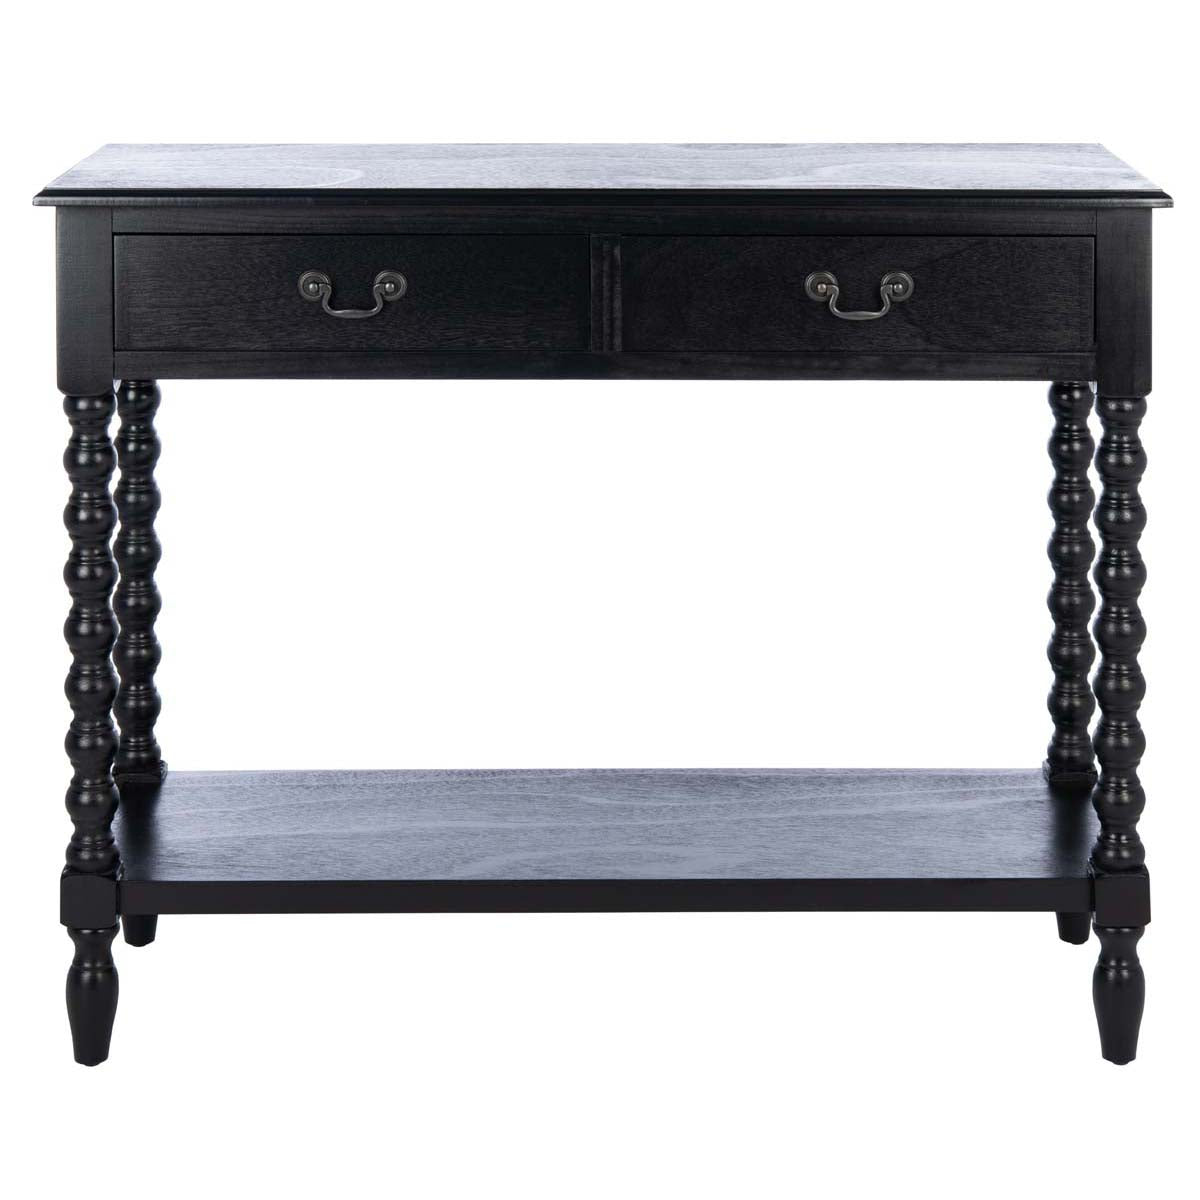 Safavieh Athena 2 Drawer Console Table, CNS5702